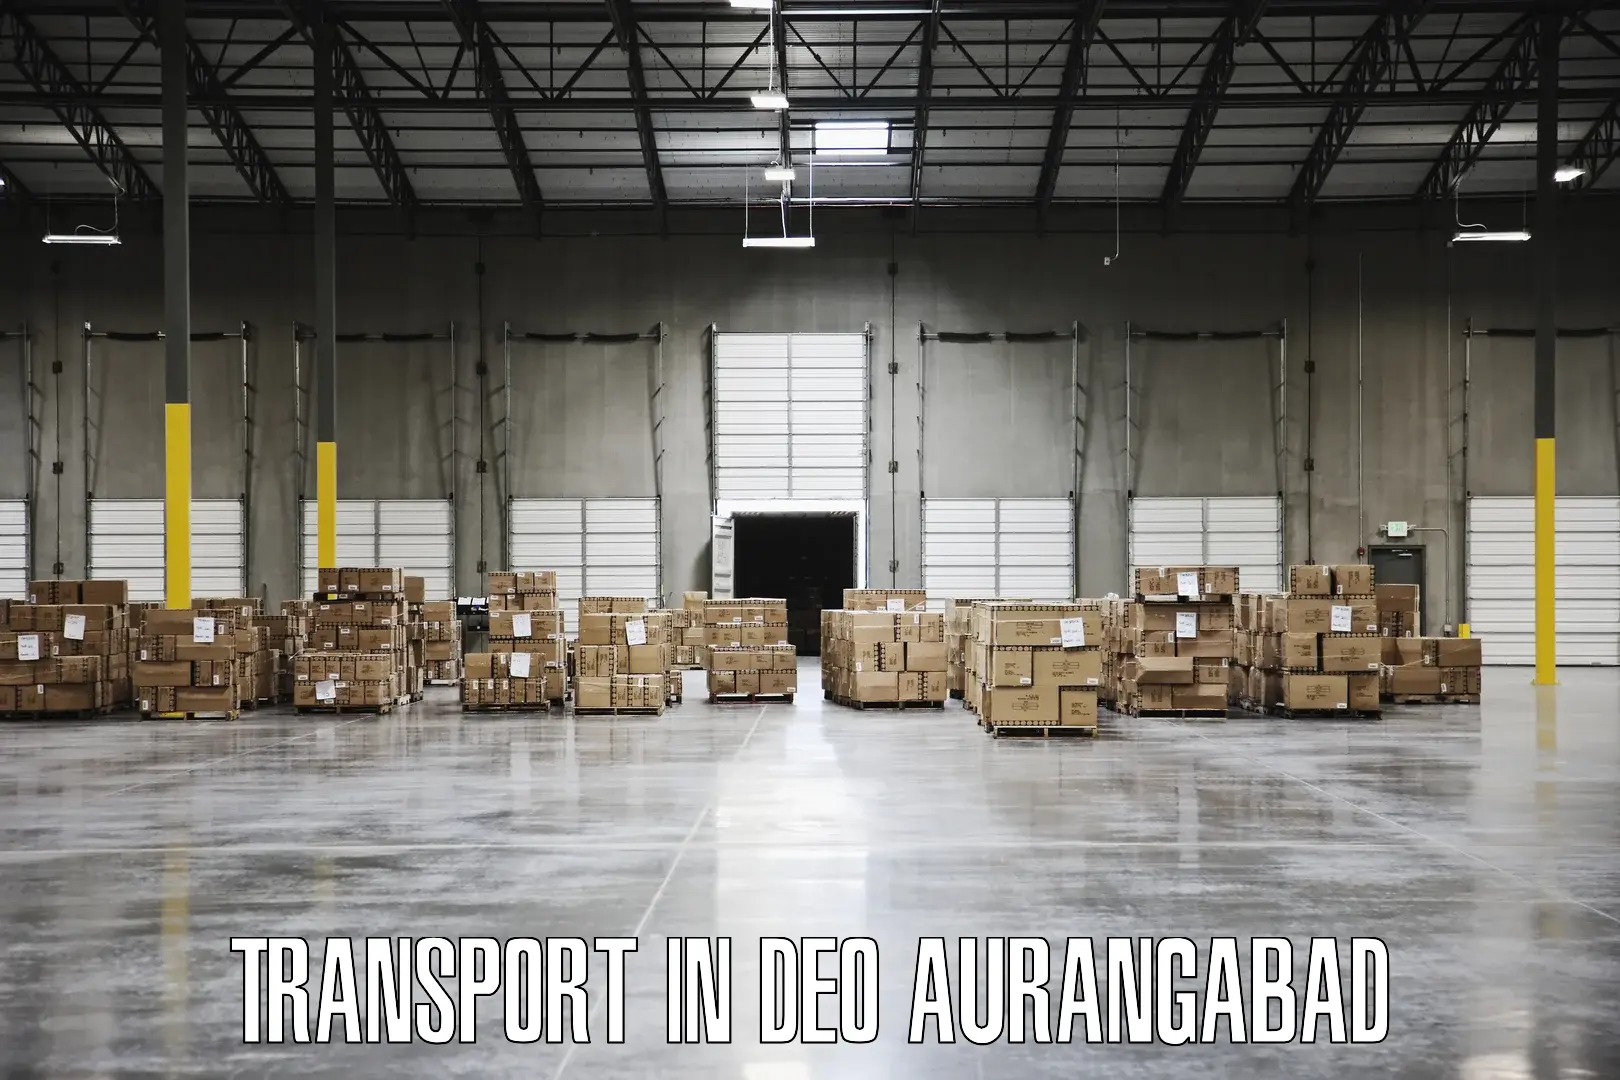 Daily transport service in Deo Aurangabad